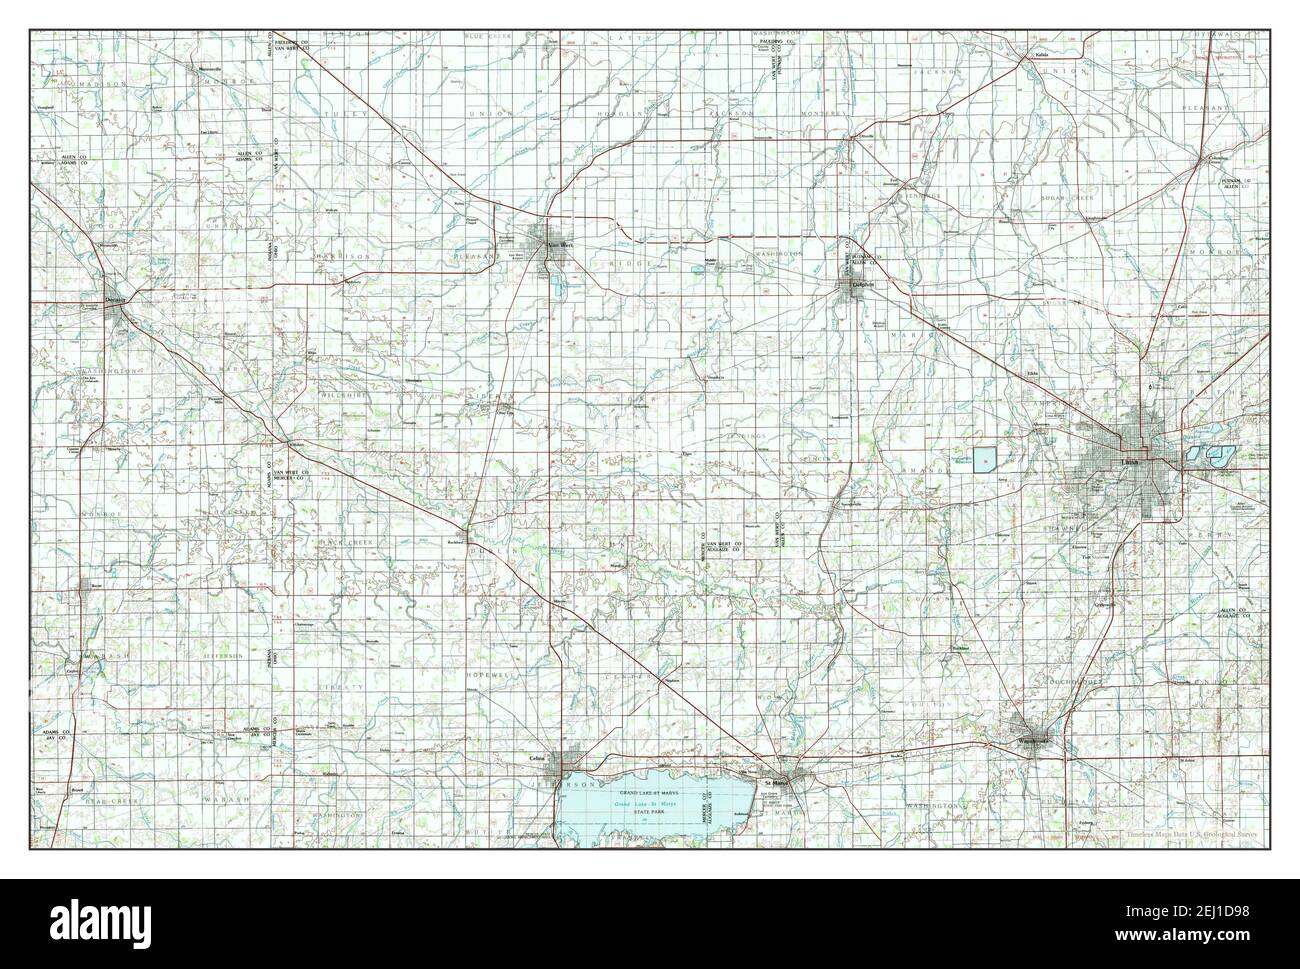 Lima Ohio Map 1986 1100000 United States Of America By Timeless Maps Data Us Geological Survey 2EJ1D98 